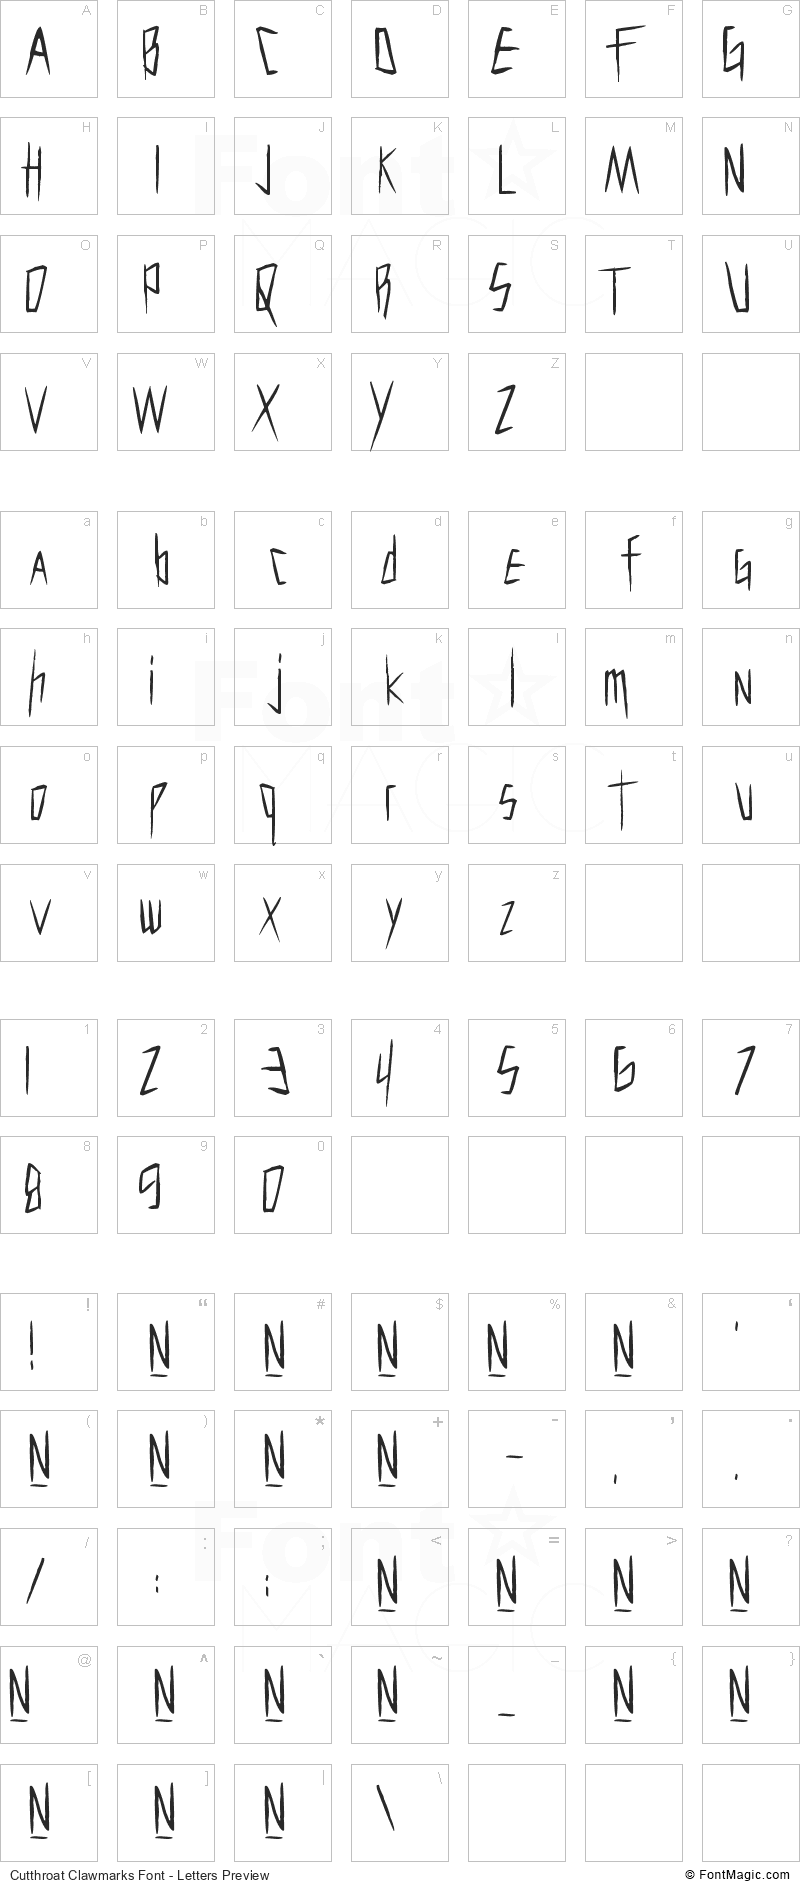 Cutthroat Clawmarks Font - All Latters Preview Chart